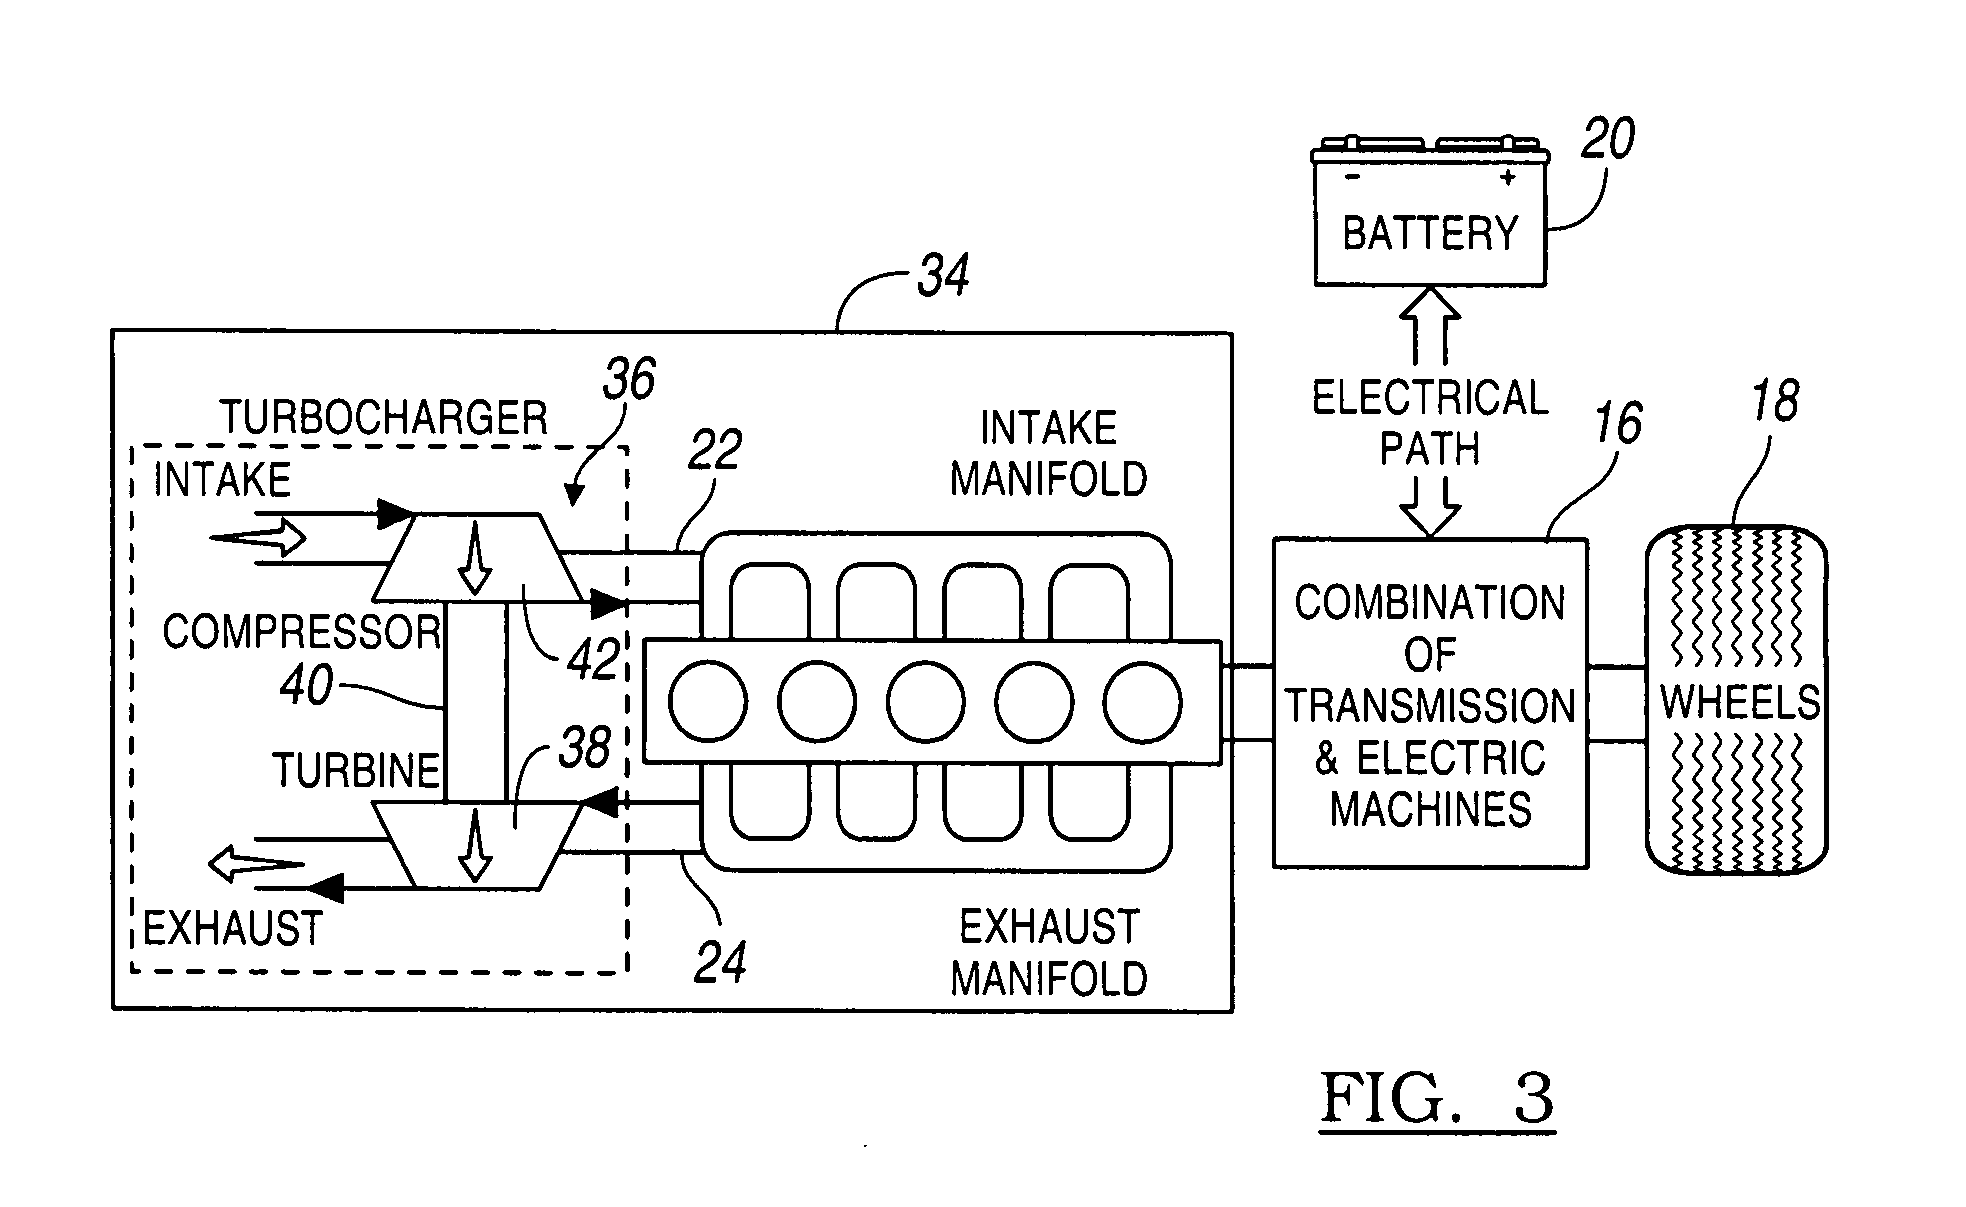 Electrical Assist for Reducing Emissions and Torsion Response Delay in a Hybrid Electric Vehicle